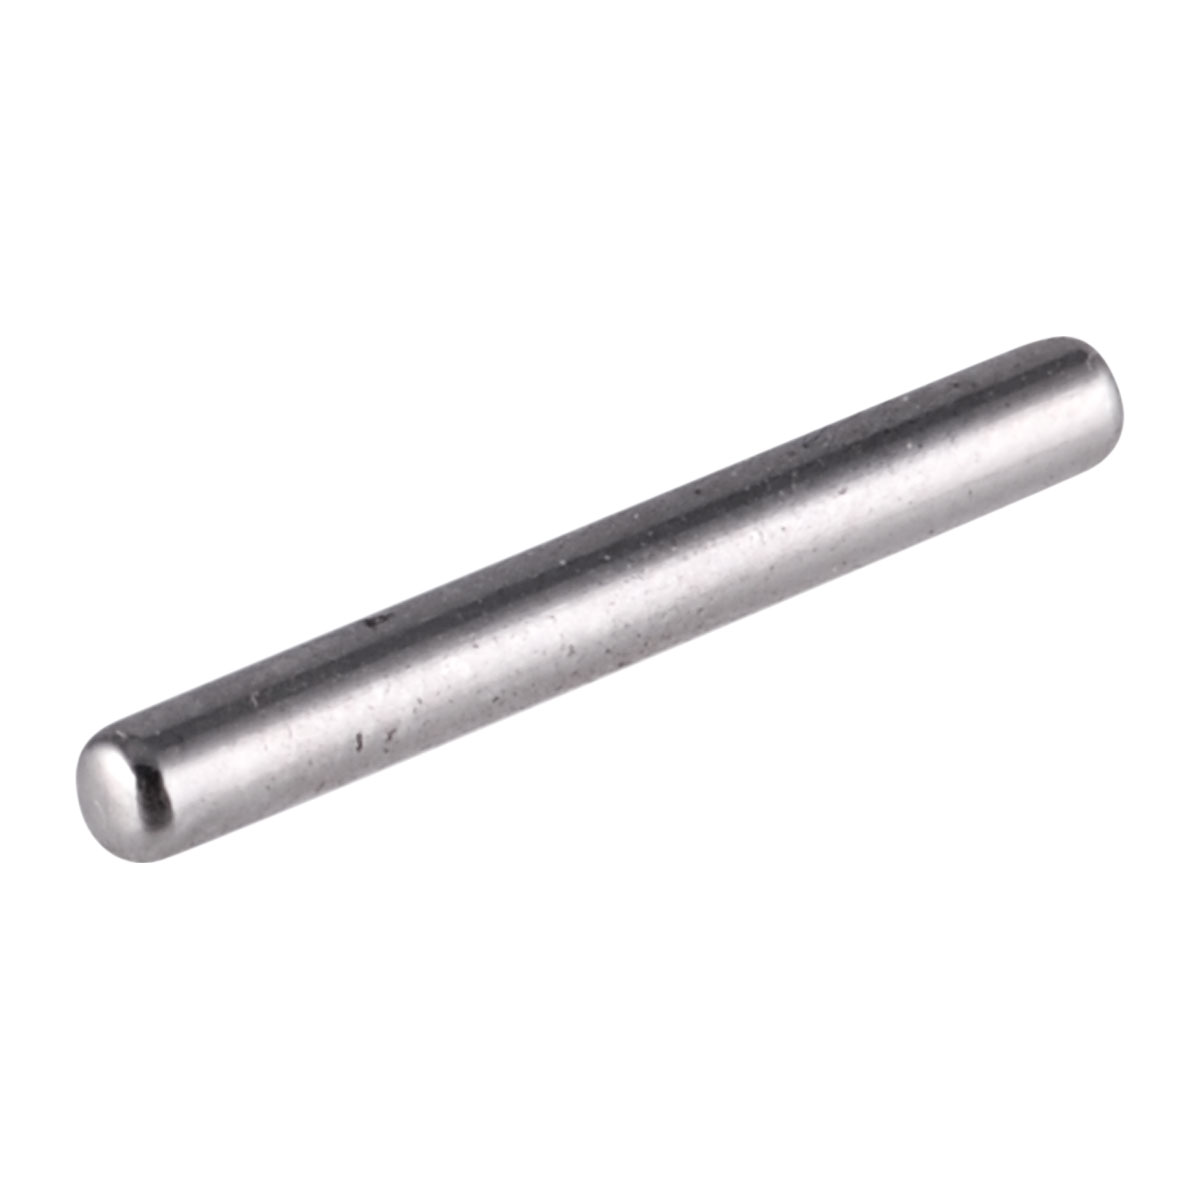 BENELLI - ROLLER PIN